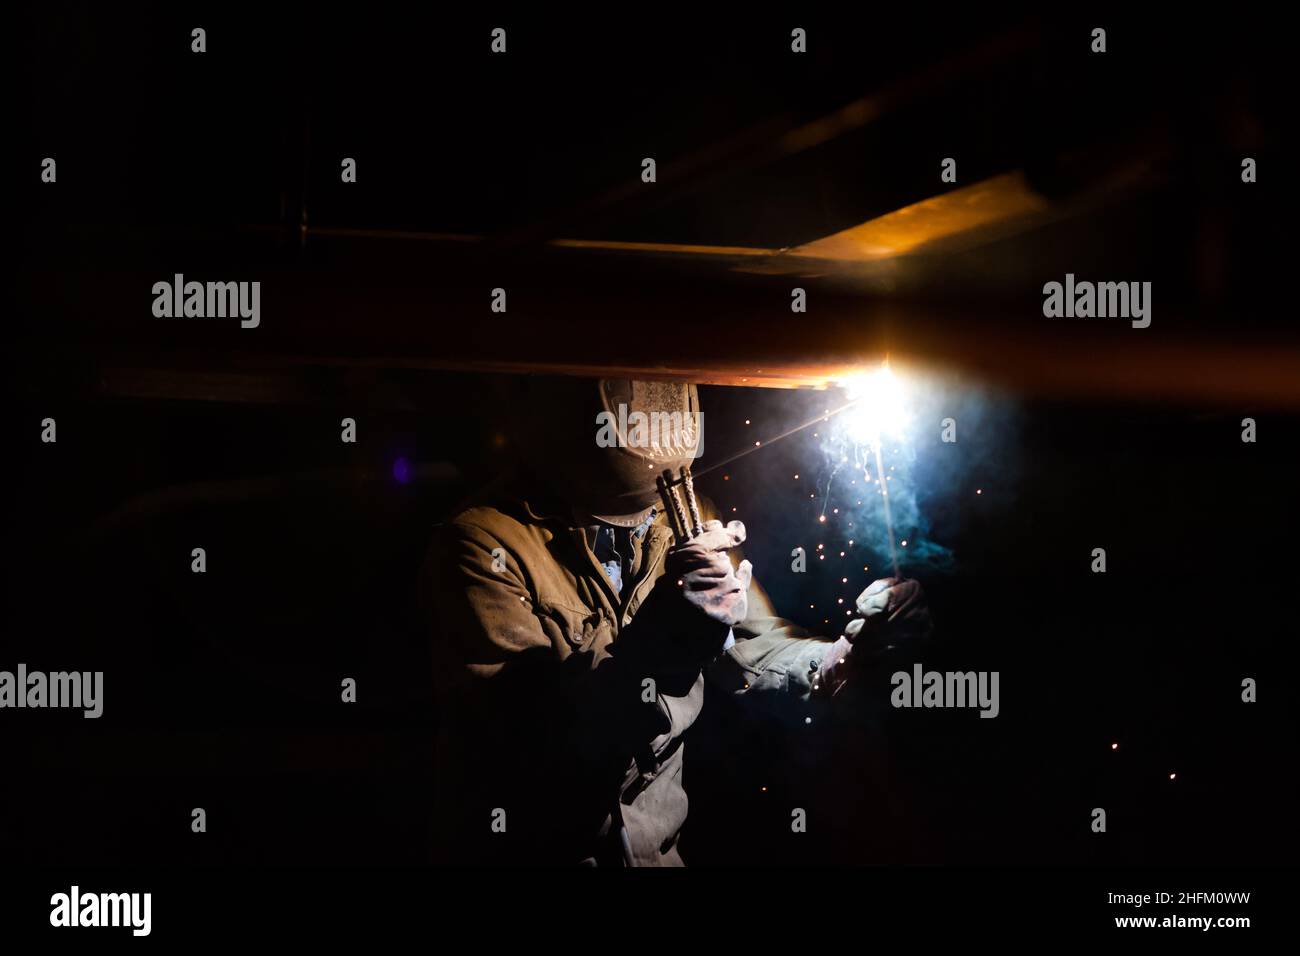 Welding of metal. Worker in mask and gloves. Bright light and sparks. Black background. Stock Photo